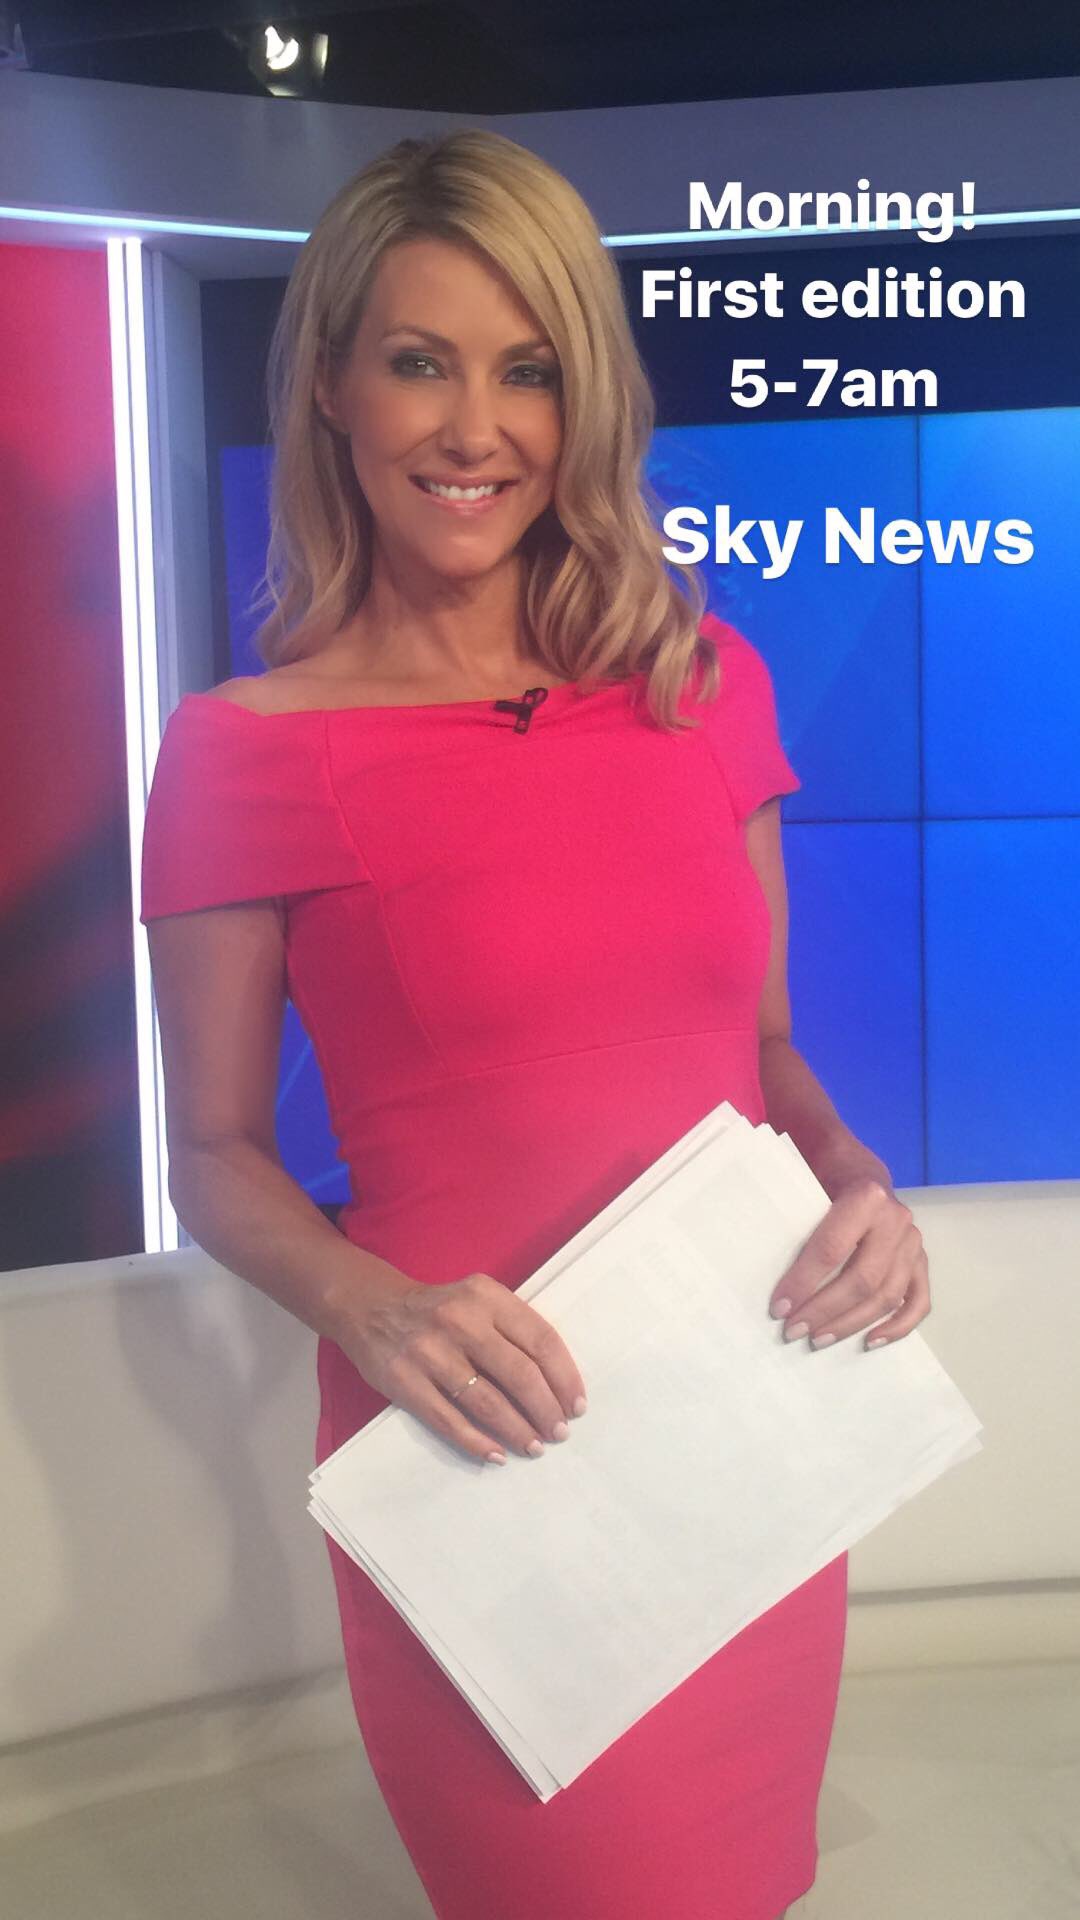 JAYNIE SEAL on Twitter: "Morning! Hope you can join me on @SkyNewsAust